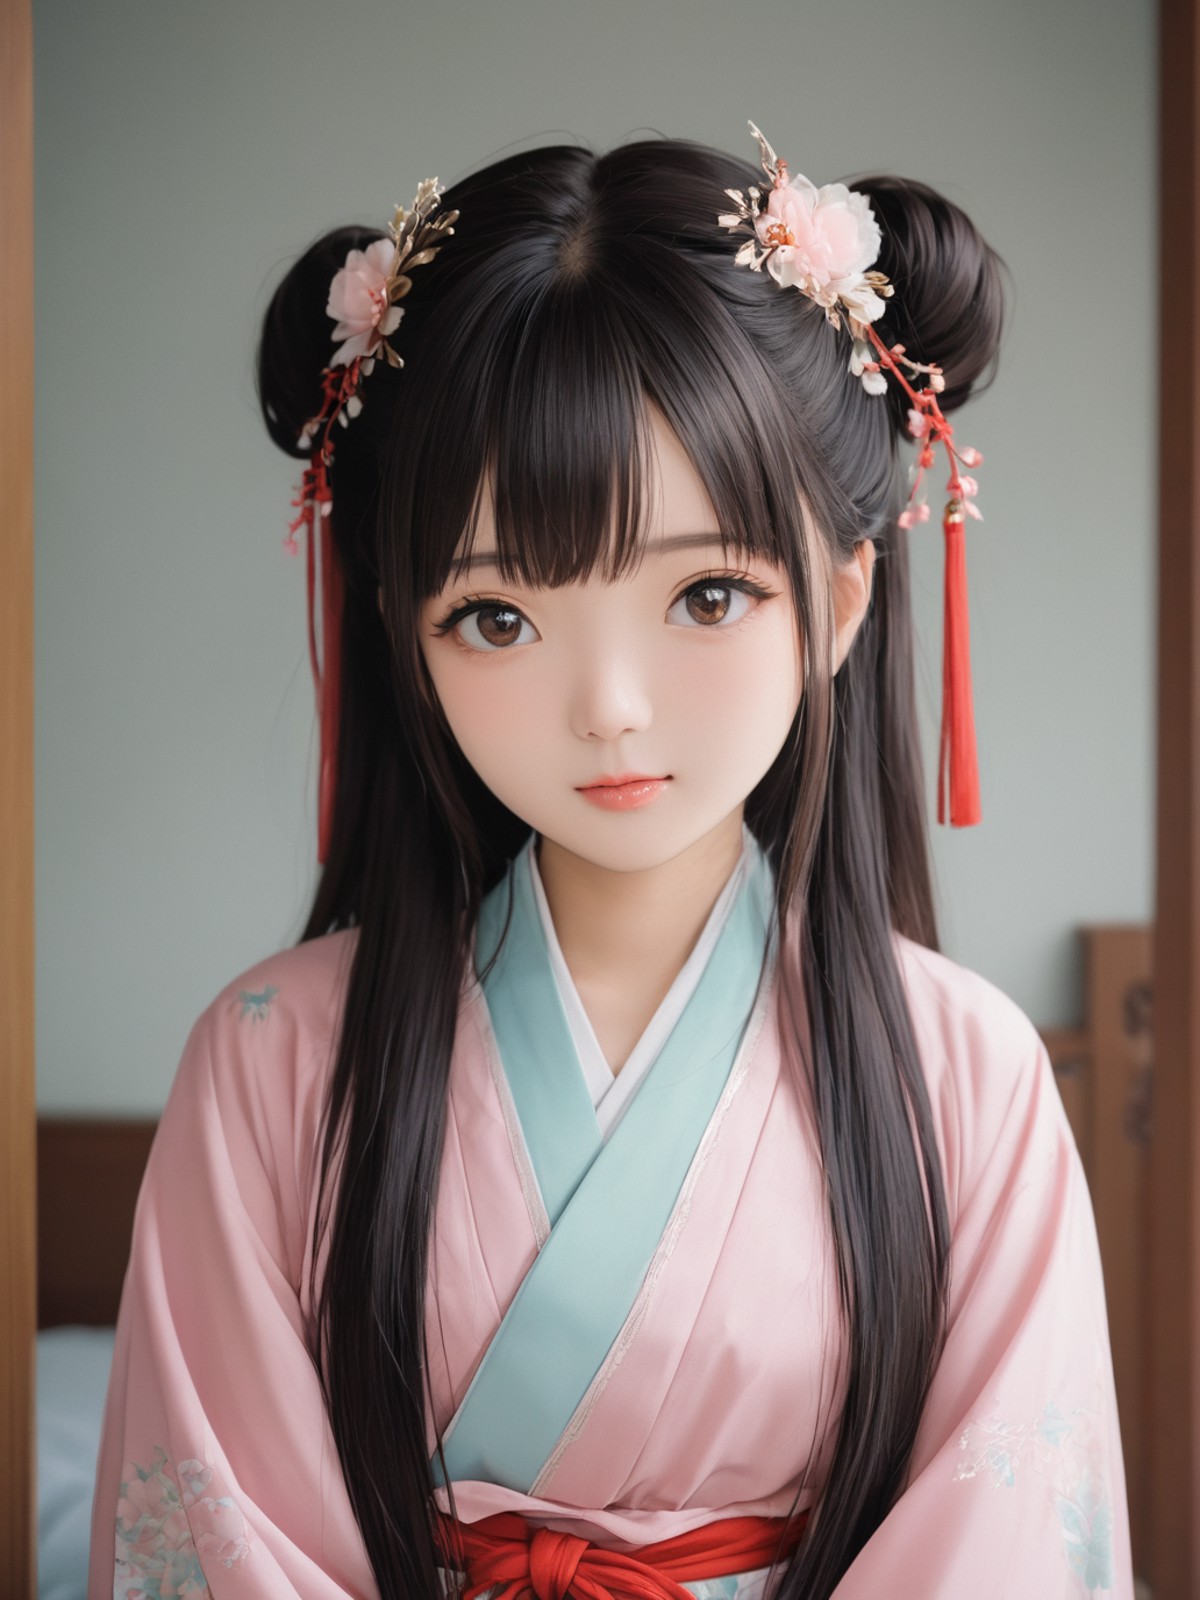 real portrait photography,
35mm photograph,RAW photography,professional grade,cute & girly \(idolmaster\),18 year old cute...